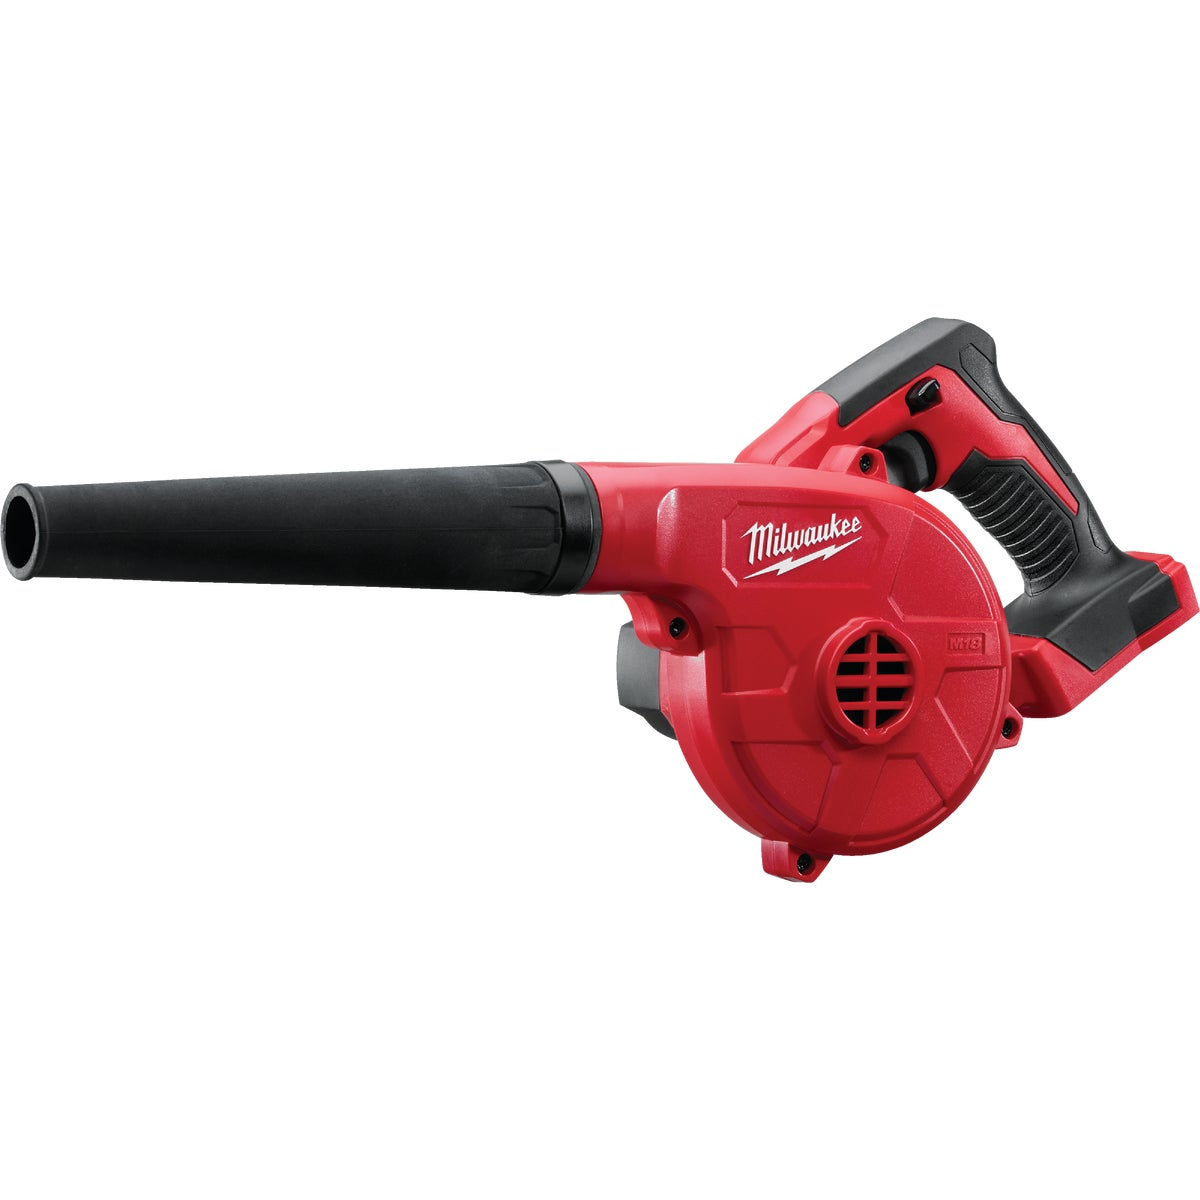 Item 303244, The M18 Compact Blower delivers the fastest jobsite cleanup.